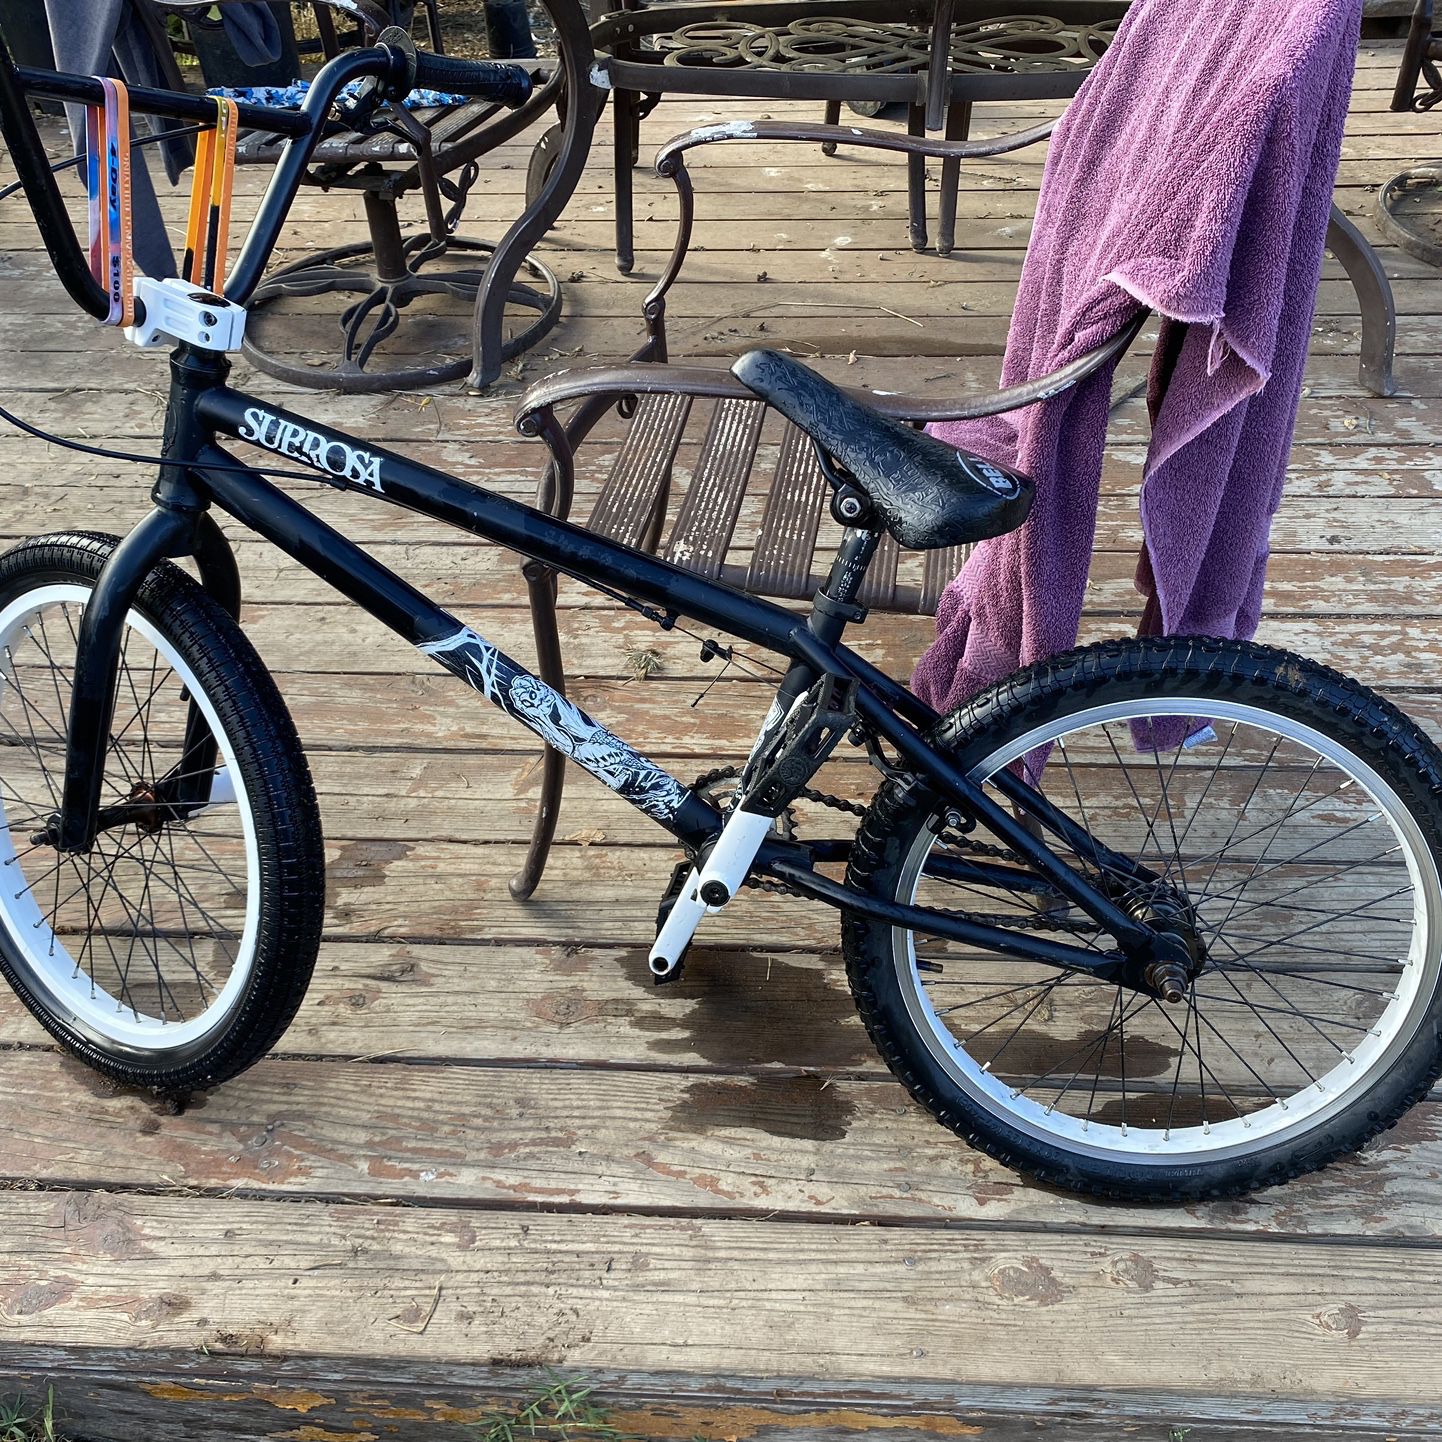 Subrosa Bmx for Sale in Castroville, CA - OfferUp